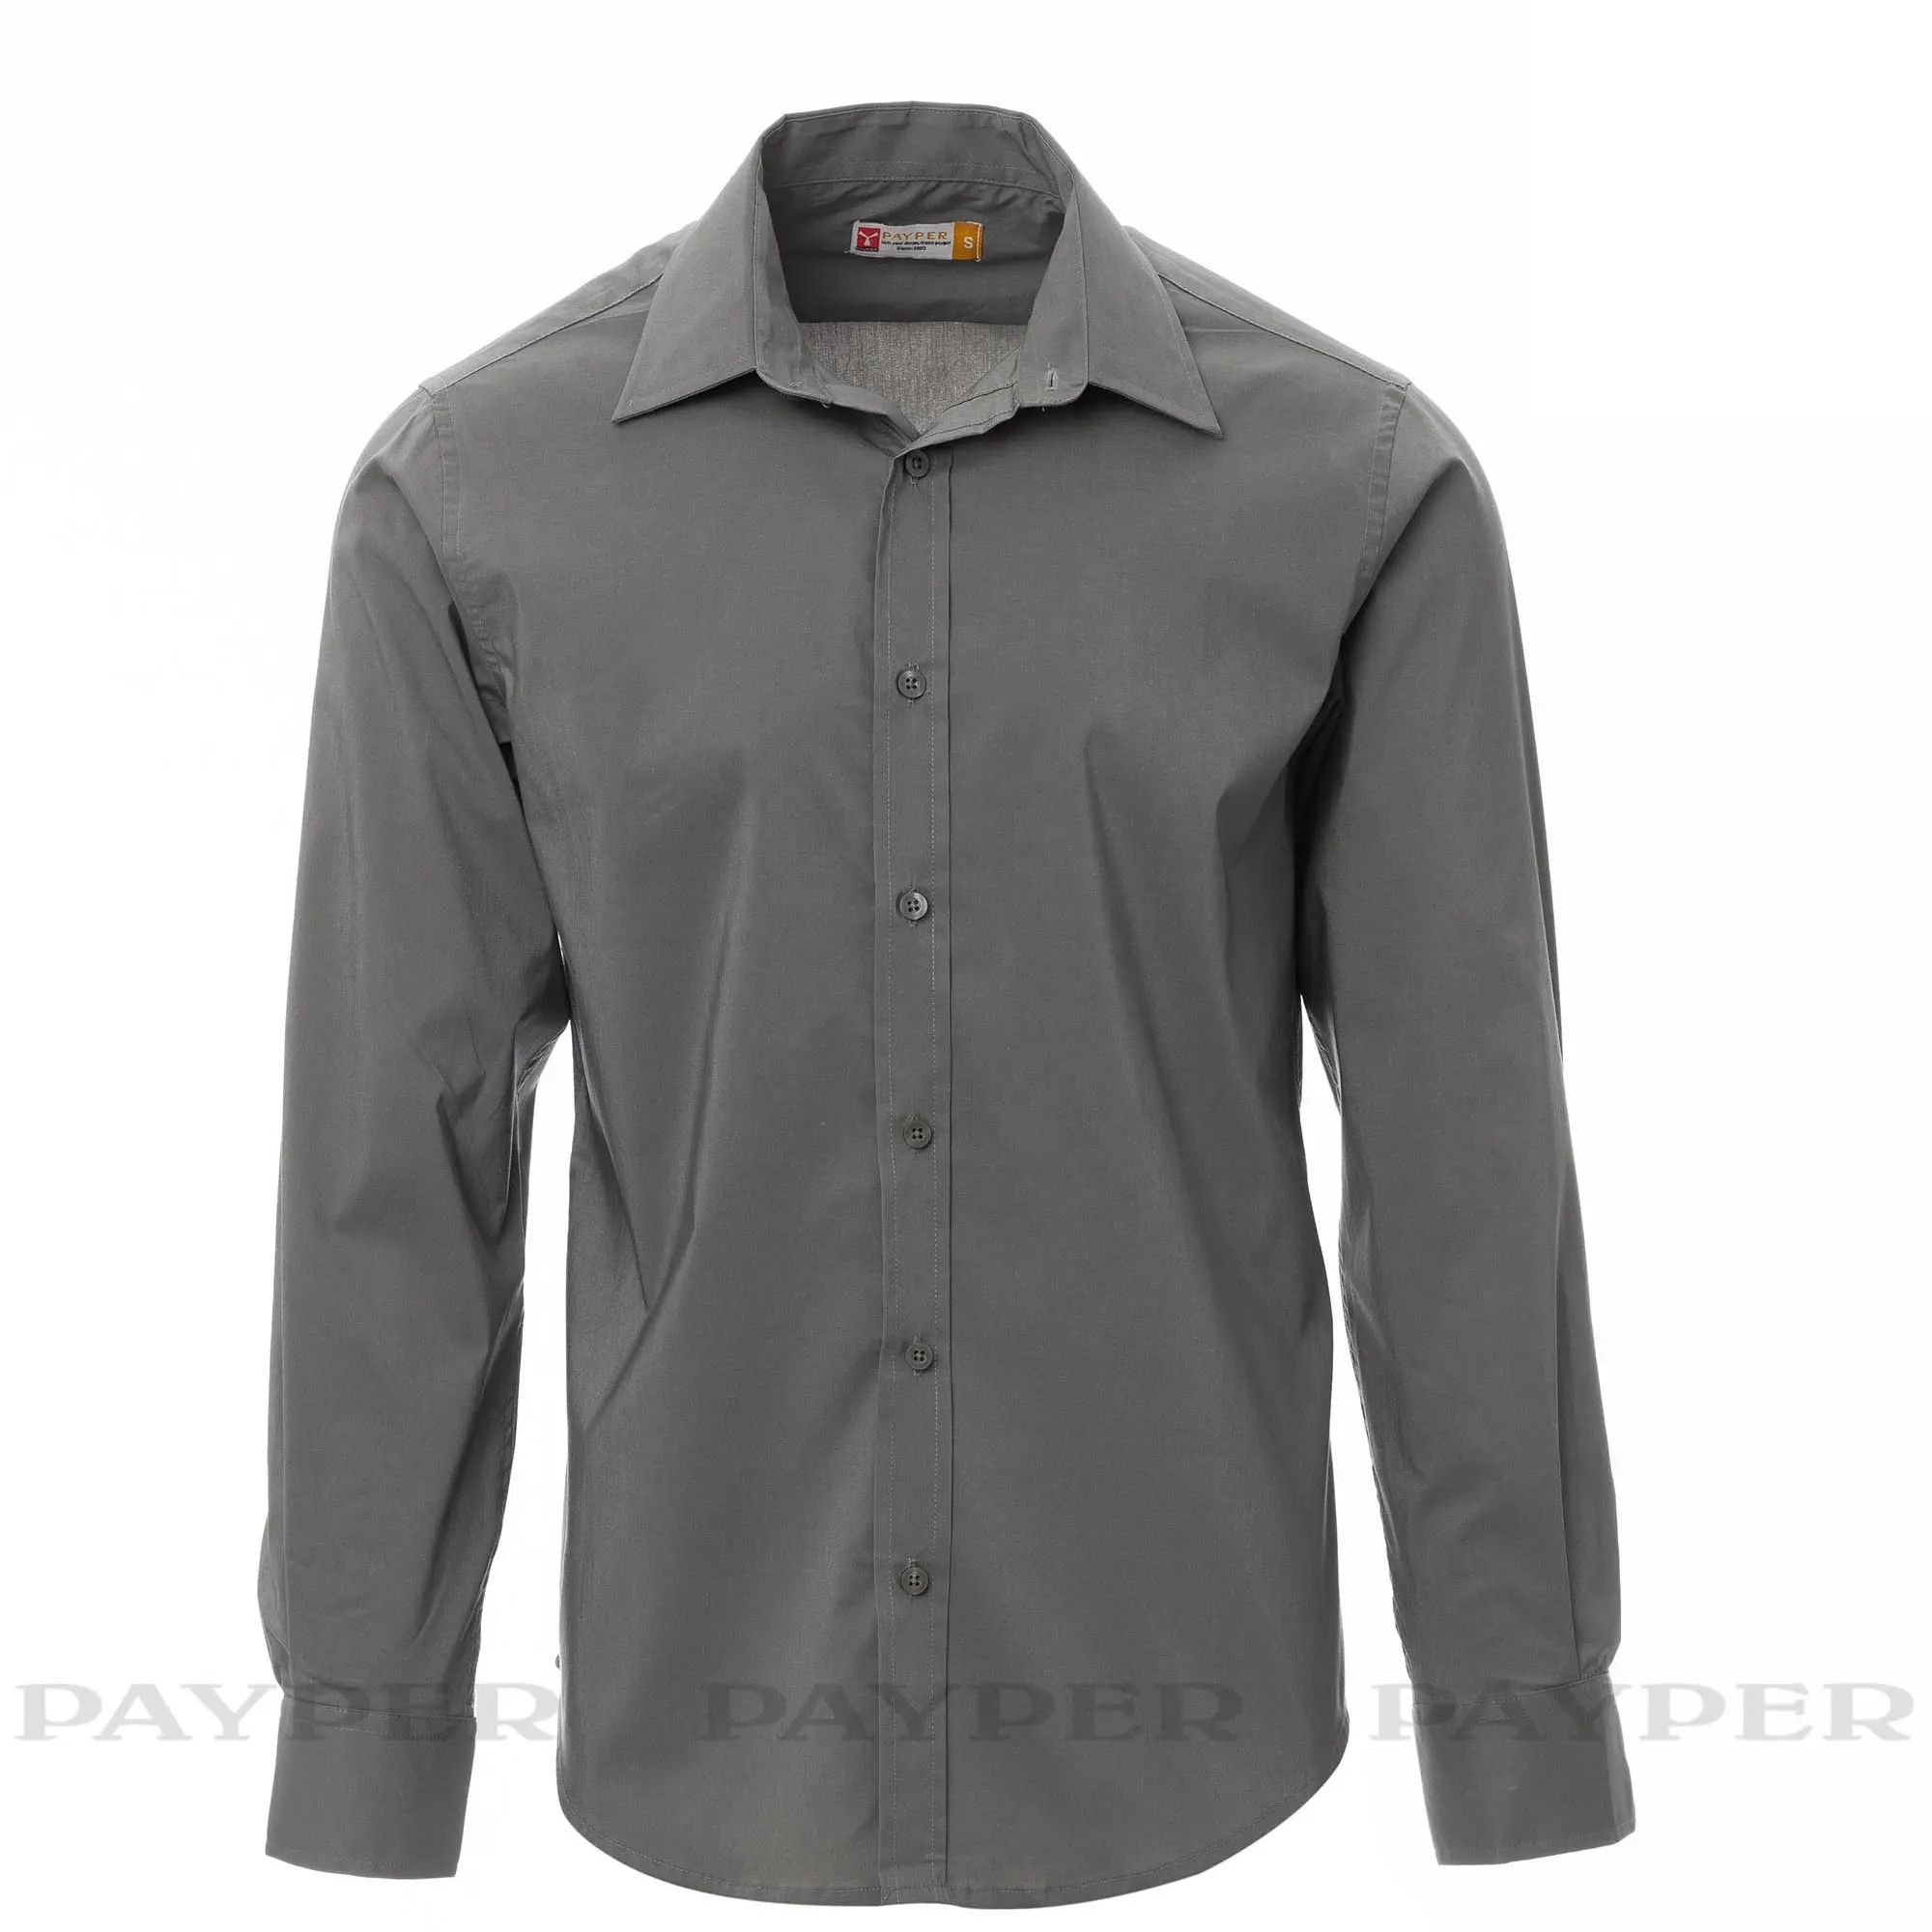 Only B2B transactions Professional customized 100% cotton corporate shirts men shirt casual